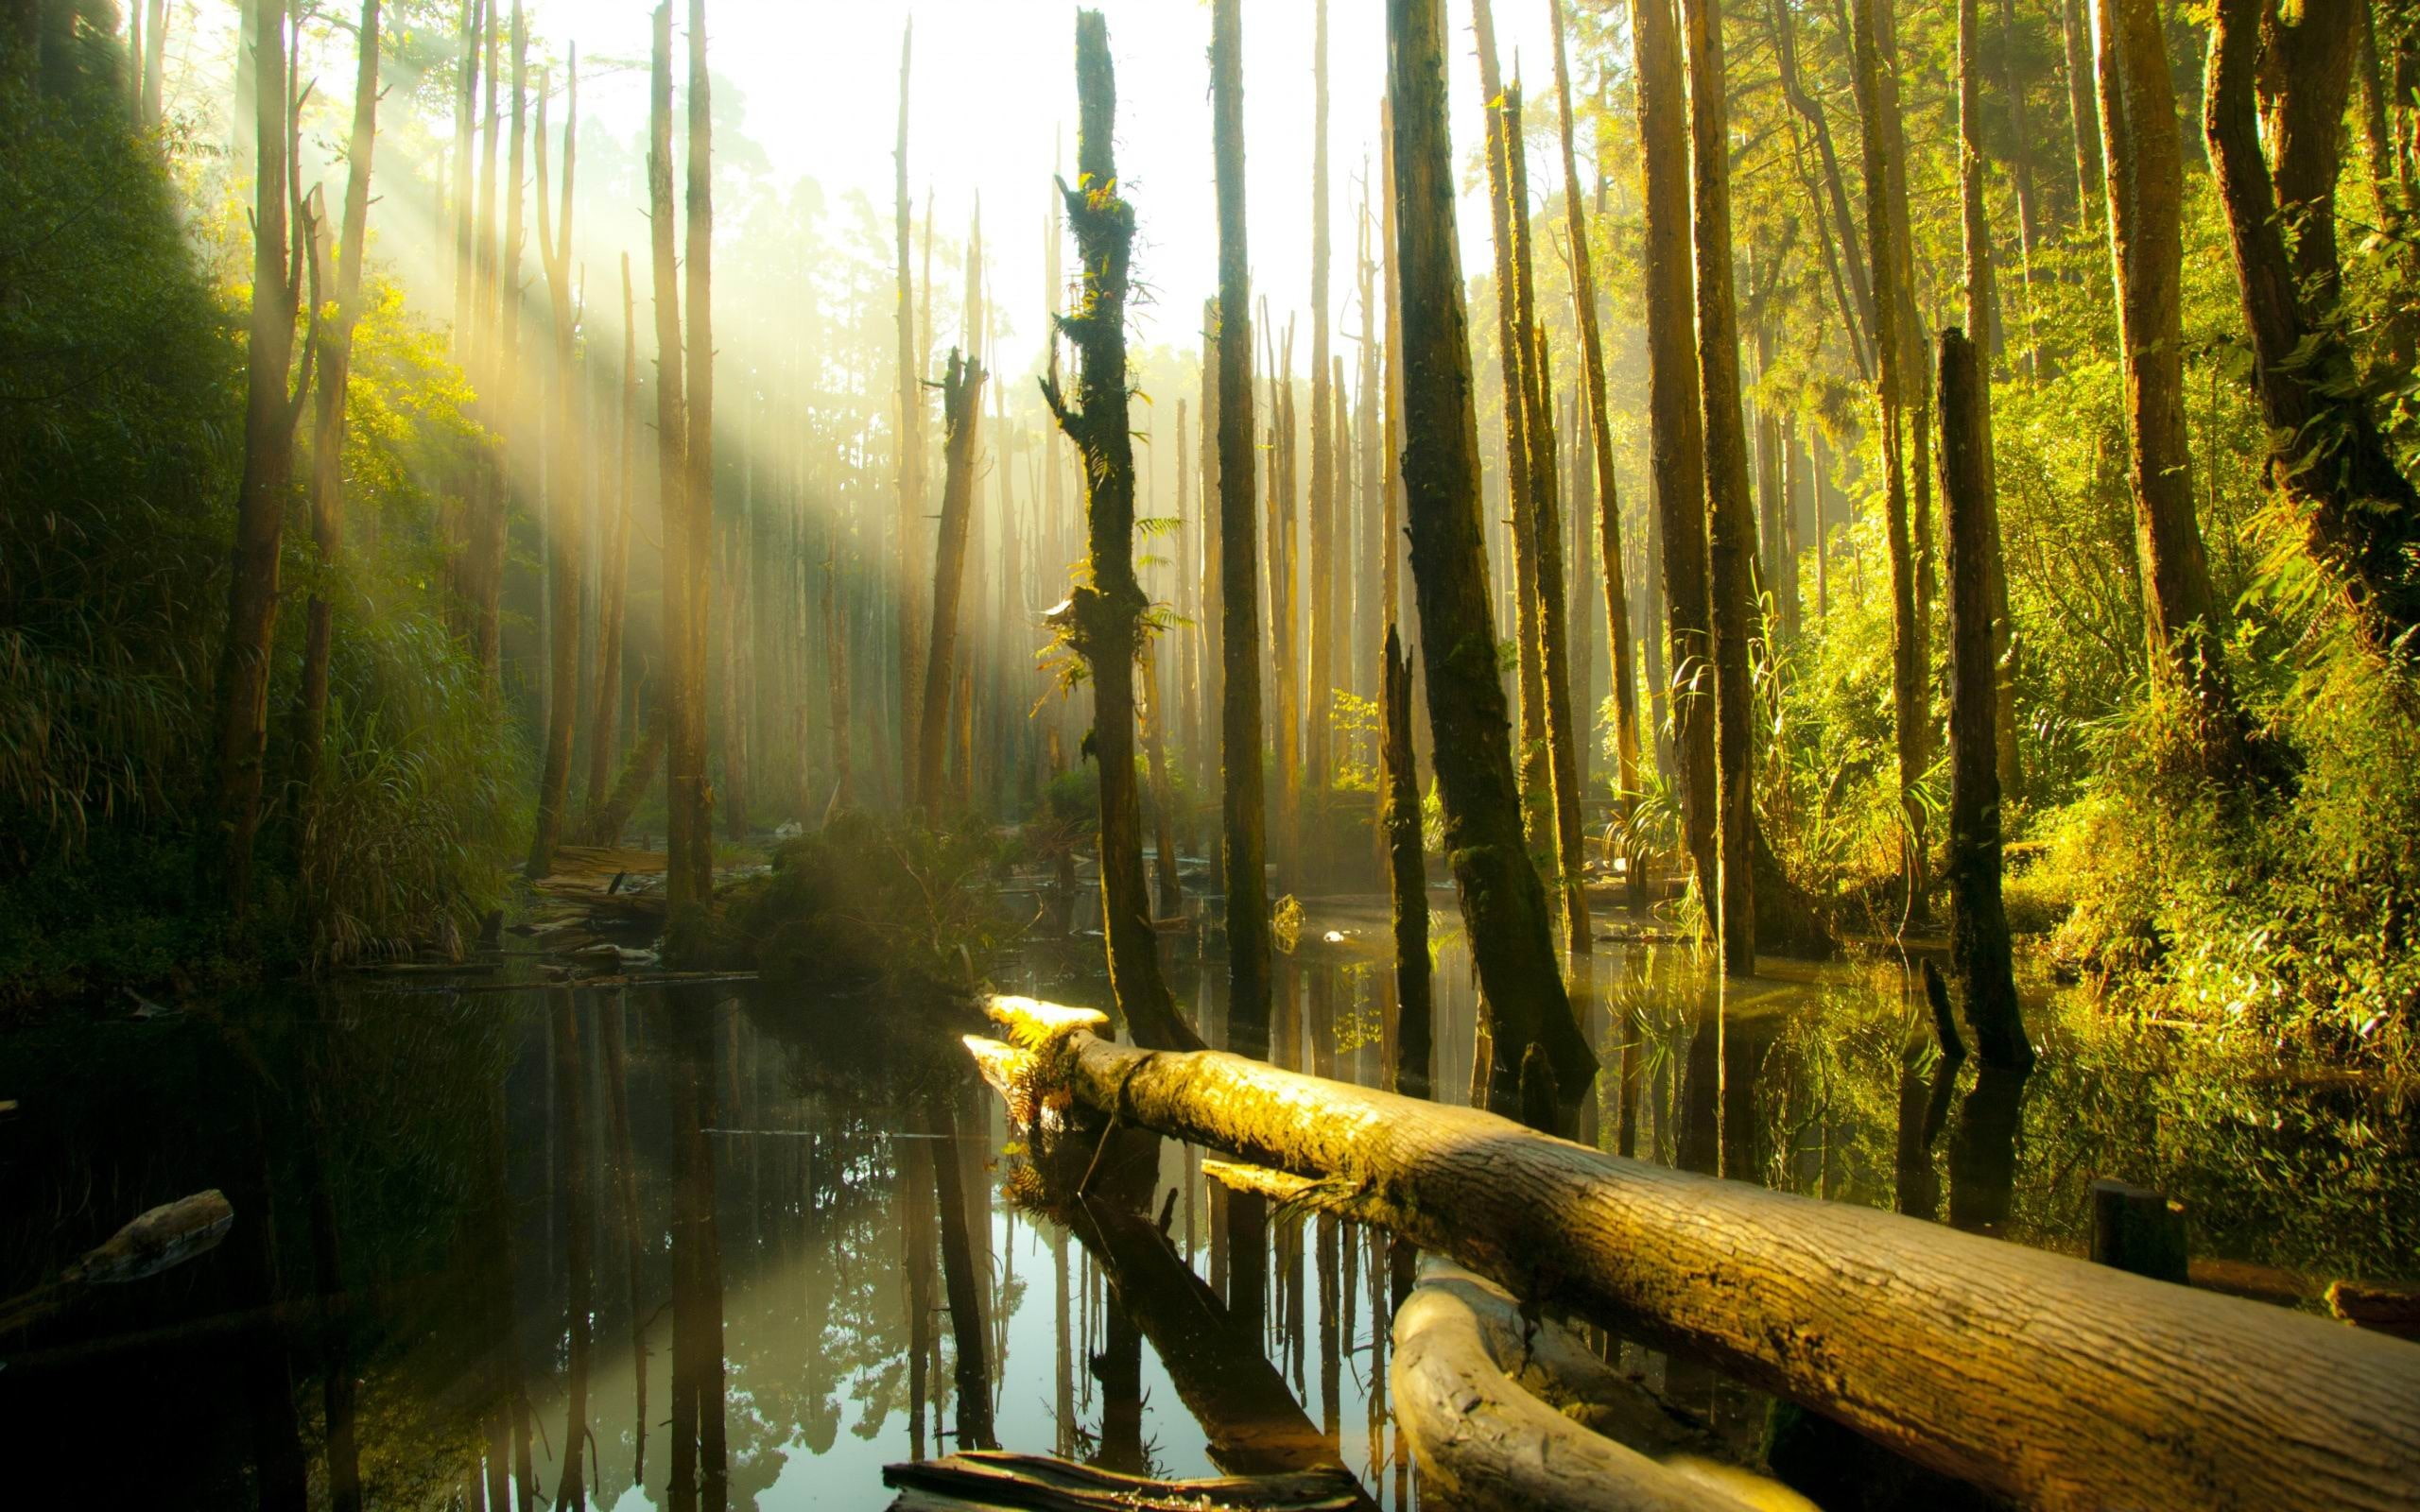 nantou county forest-scenery HD Wallpaper, bare trees, water